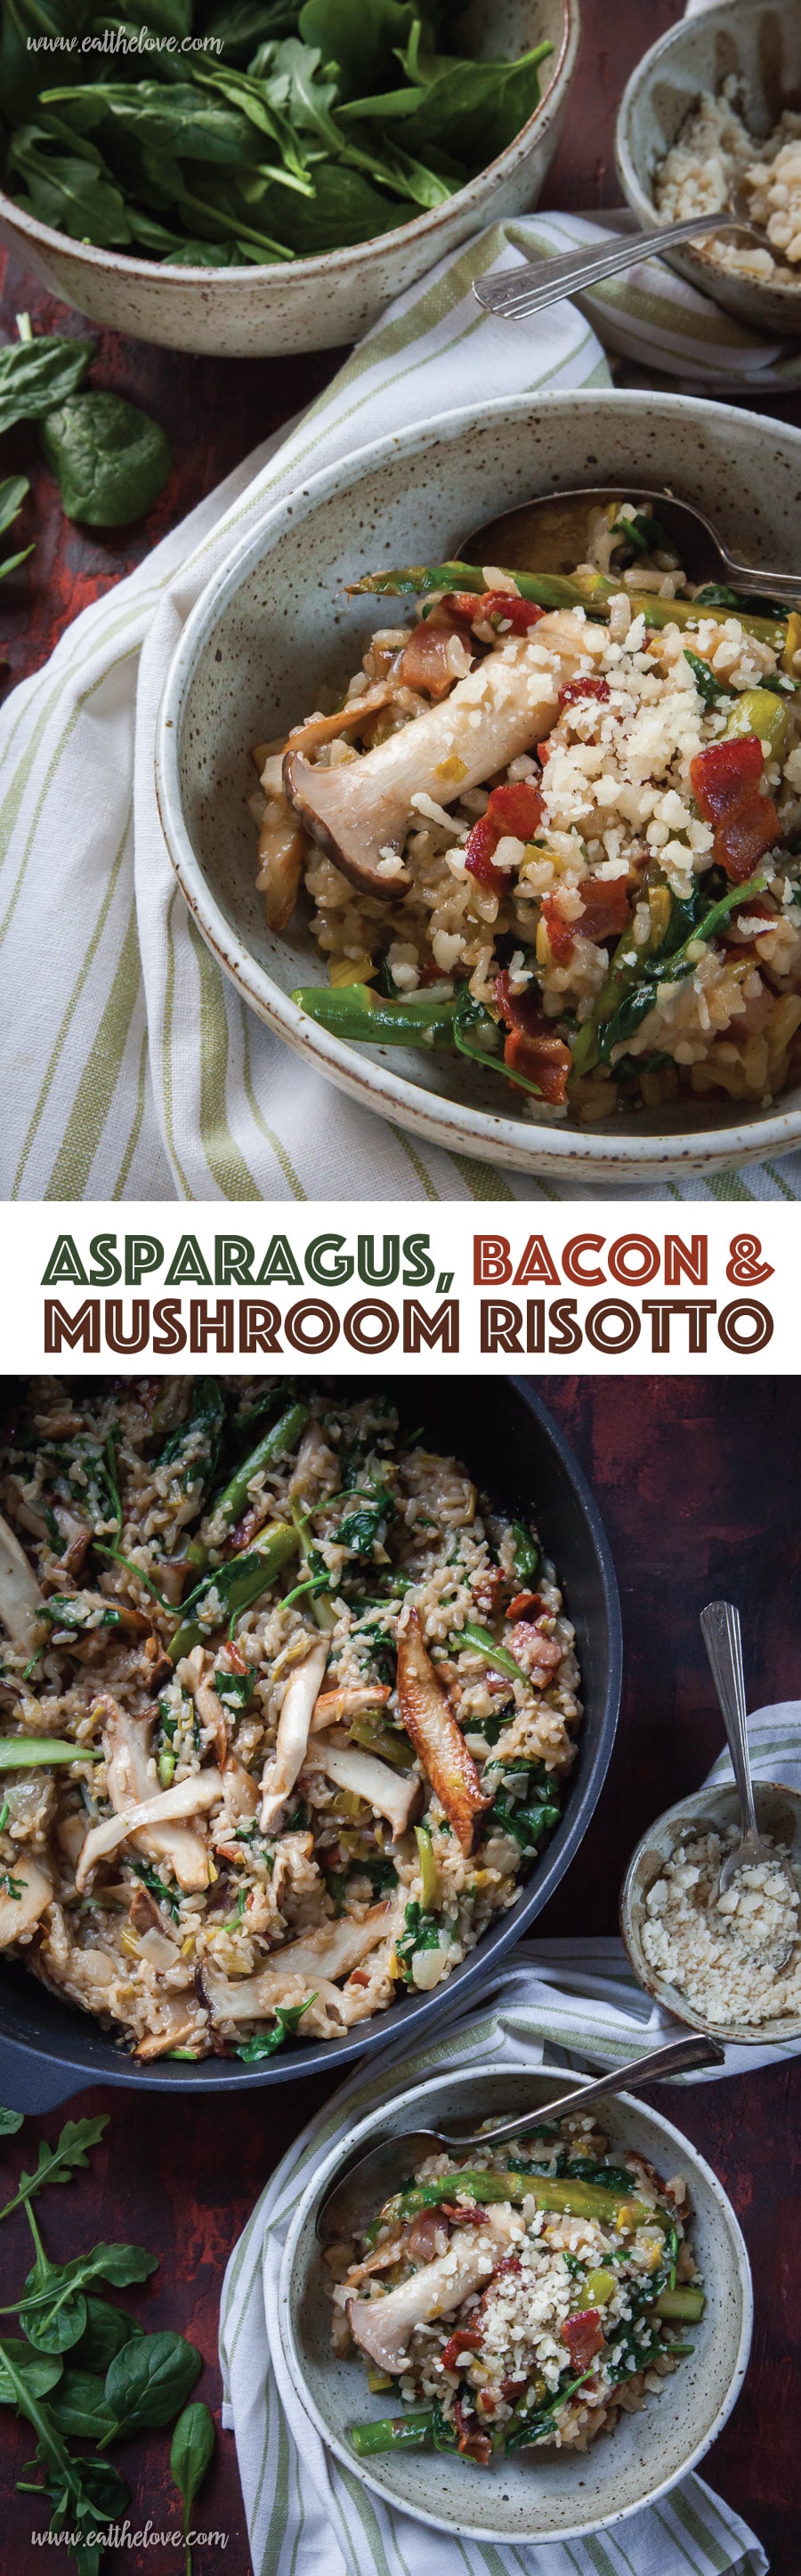 This easy to make Asparagus, Bacon and Mushroom Risotto is sophisticated enough for a dinner party! #asparagus #dinner #risotto #bacon #mushroom #easy #italian